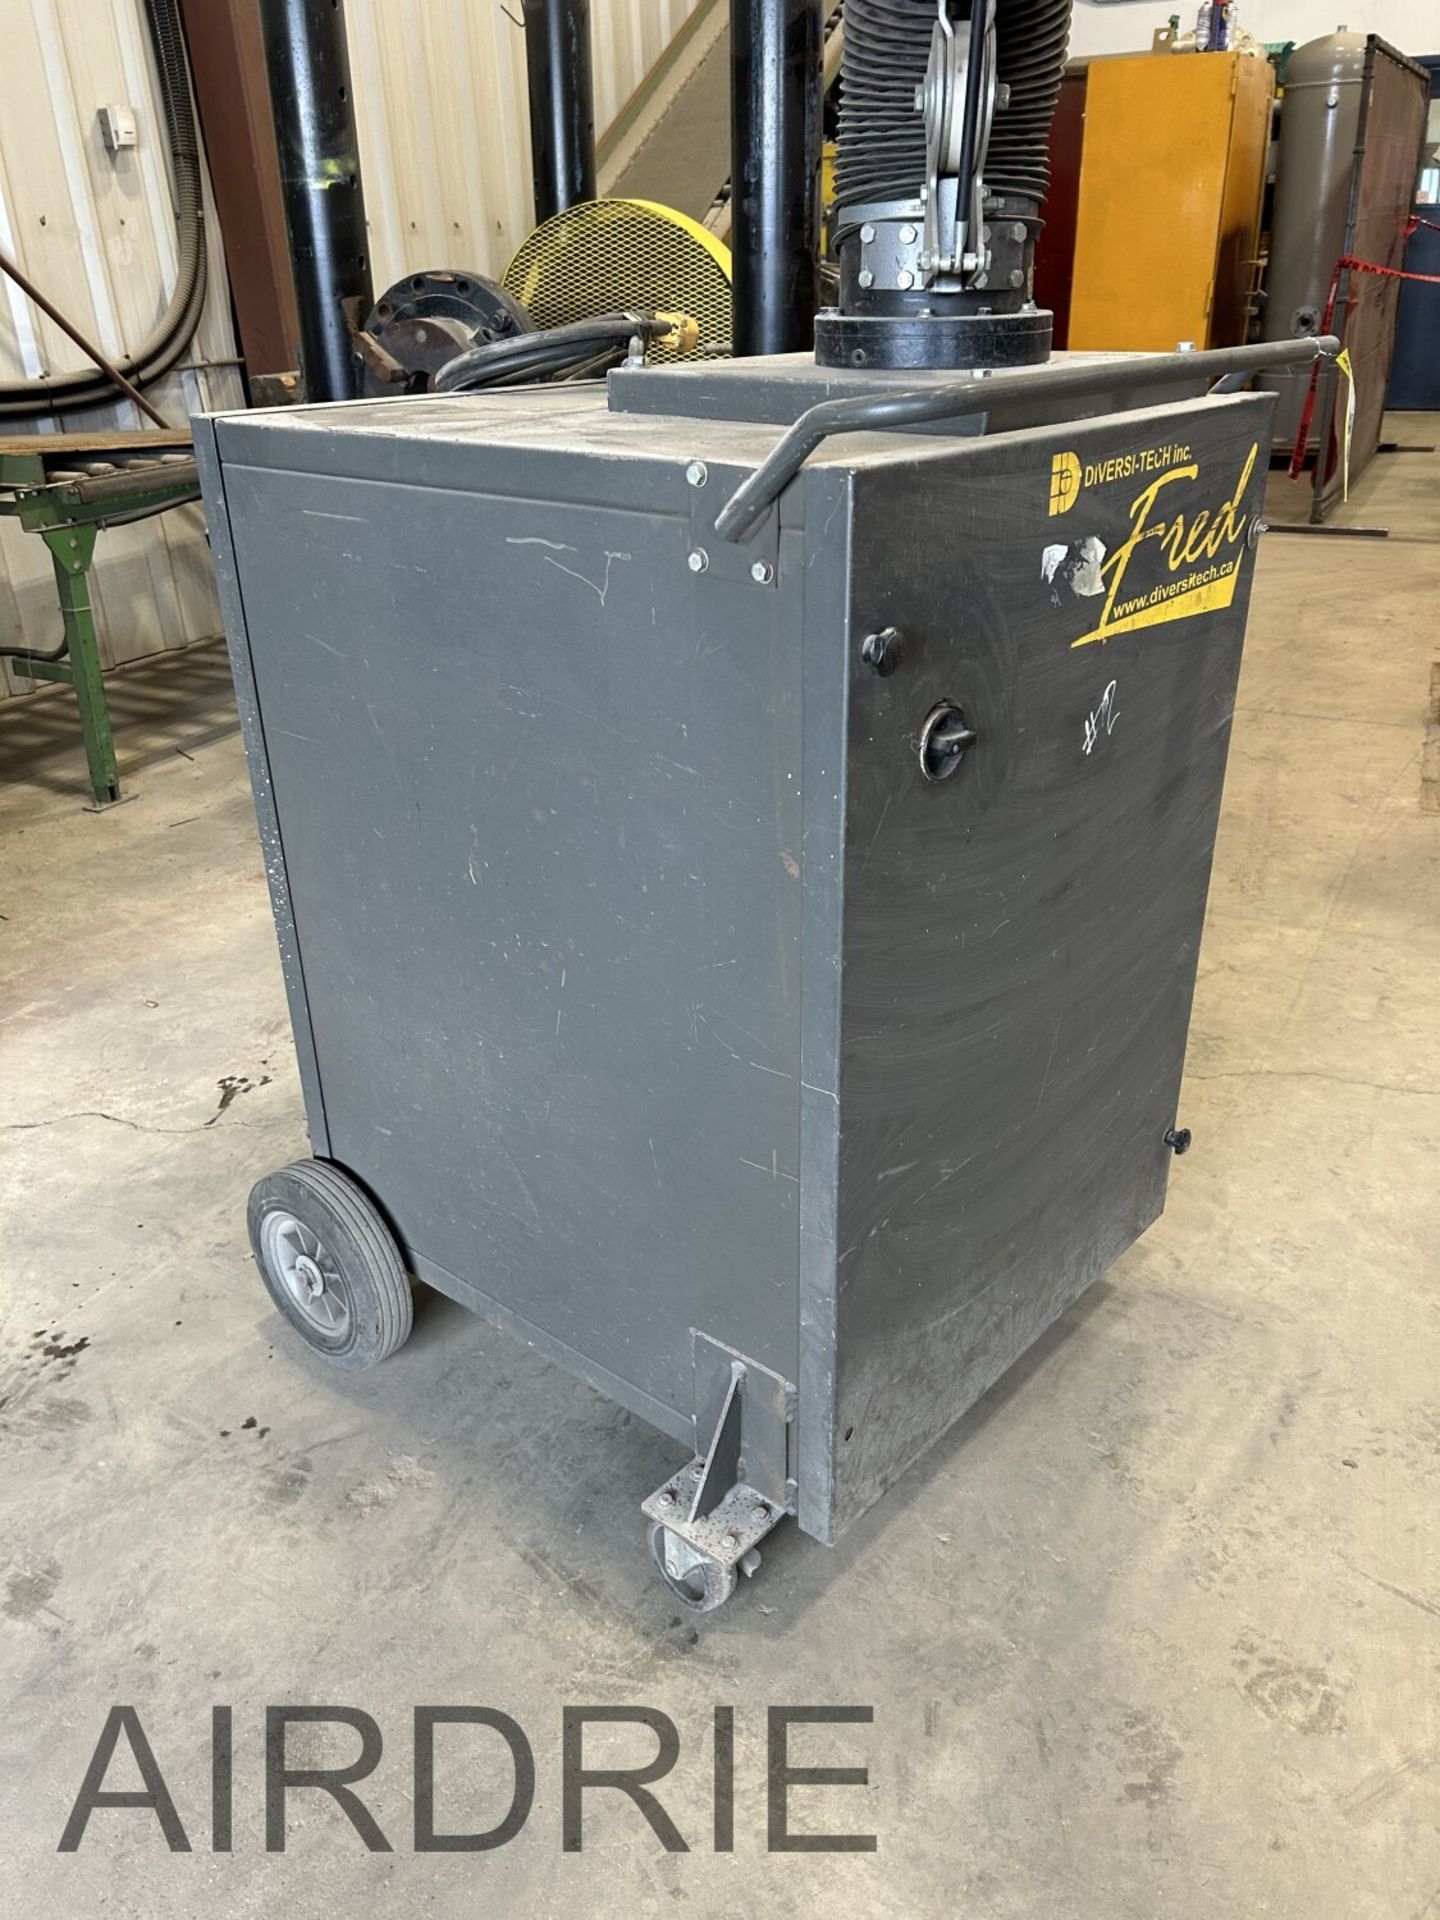 *OFFSITE* DIVERSI-TECH FRED SMOKE AND FUME EXTRACTOR , MOD. FREDJR, S/N FRJ-1203-1154 - Image 3 of 10